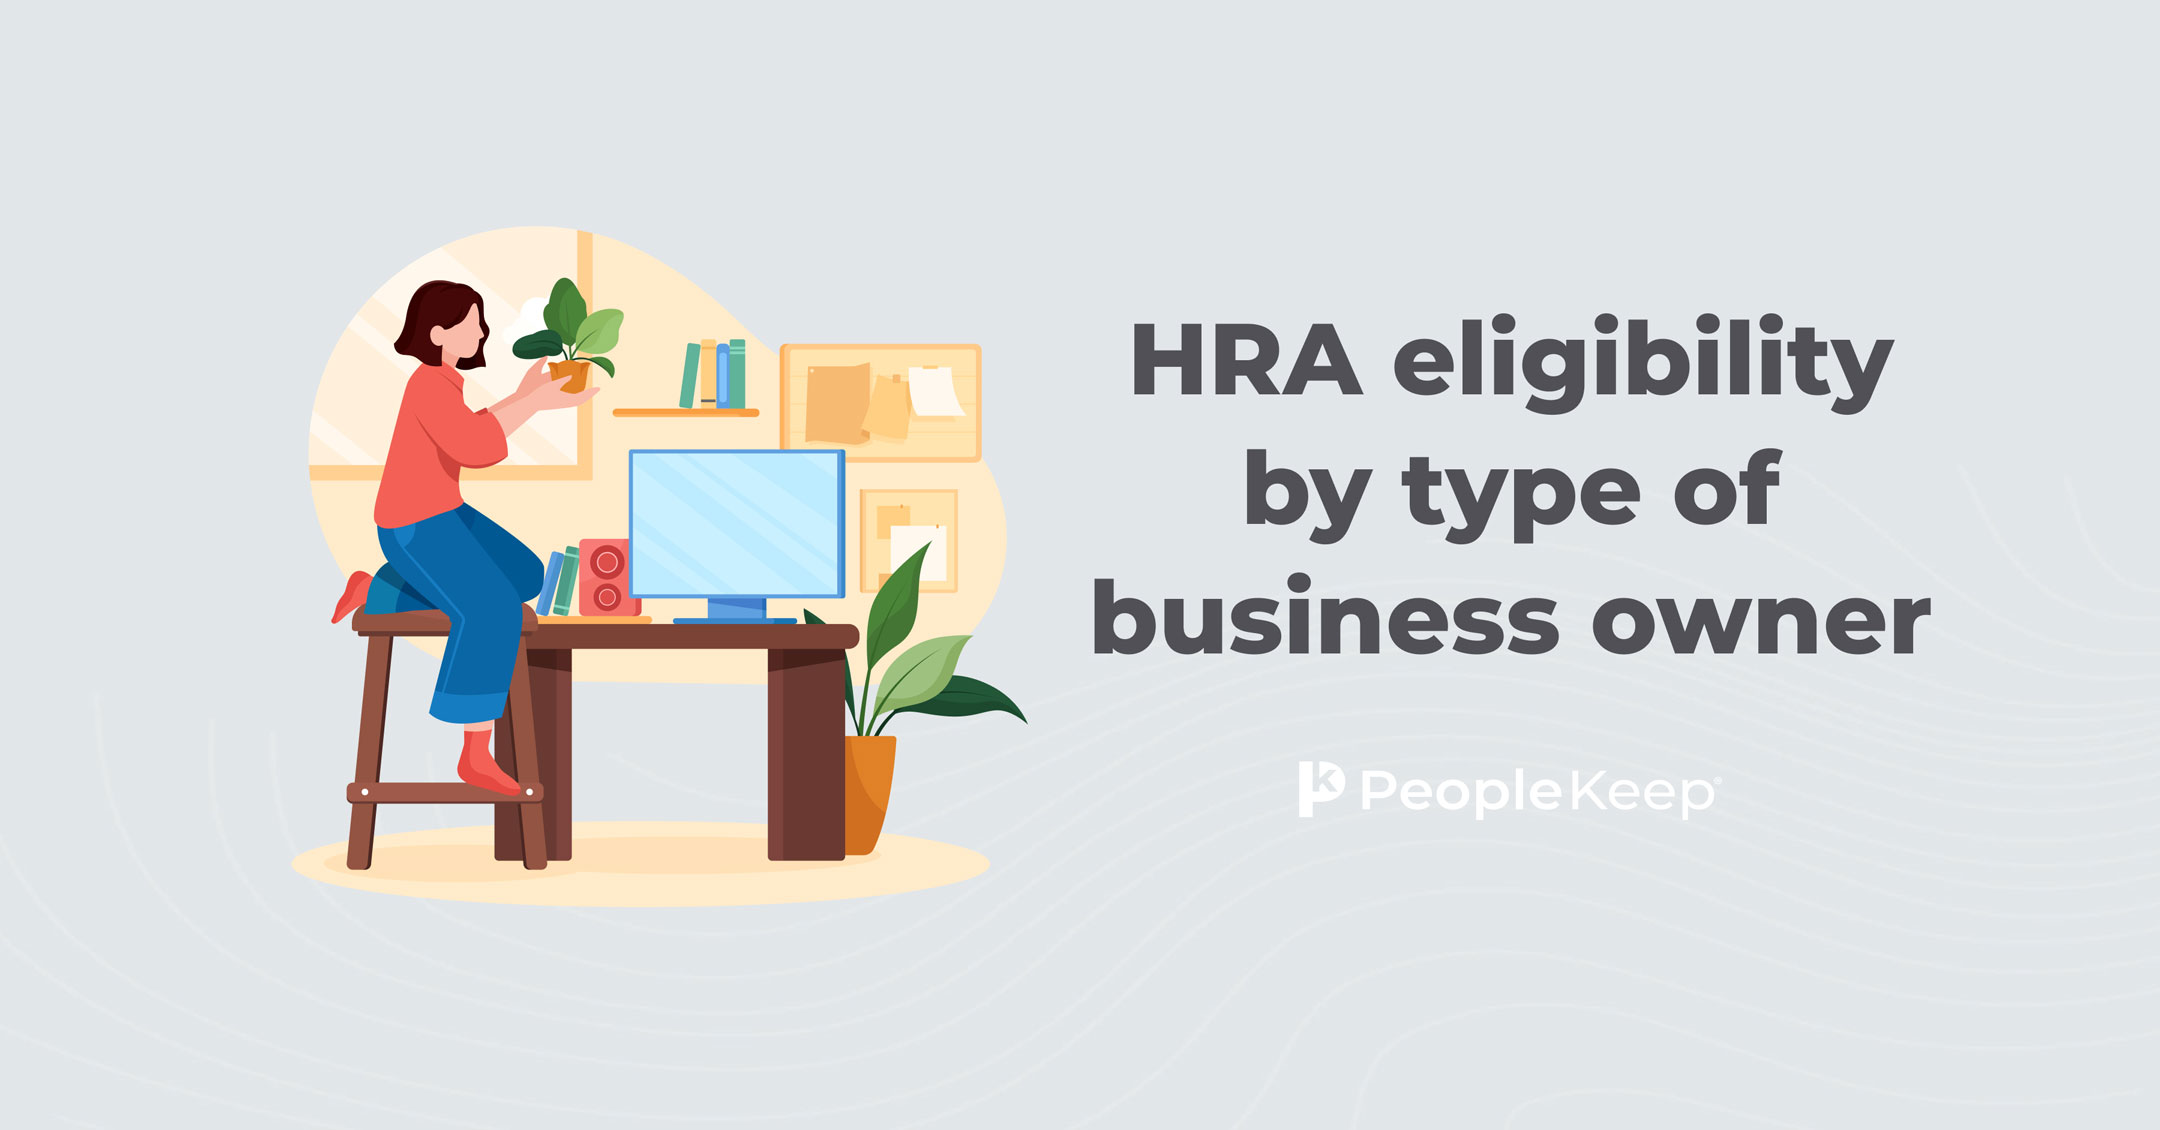 HRA eligibility by type of business owner